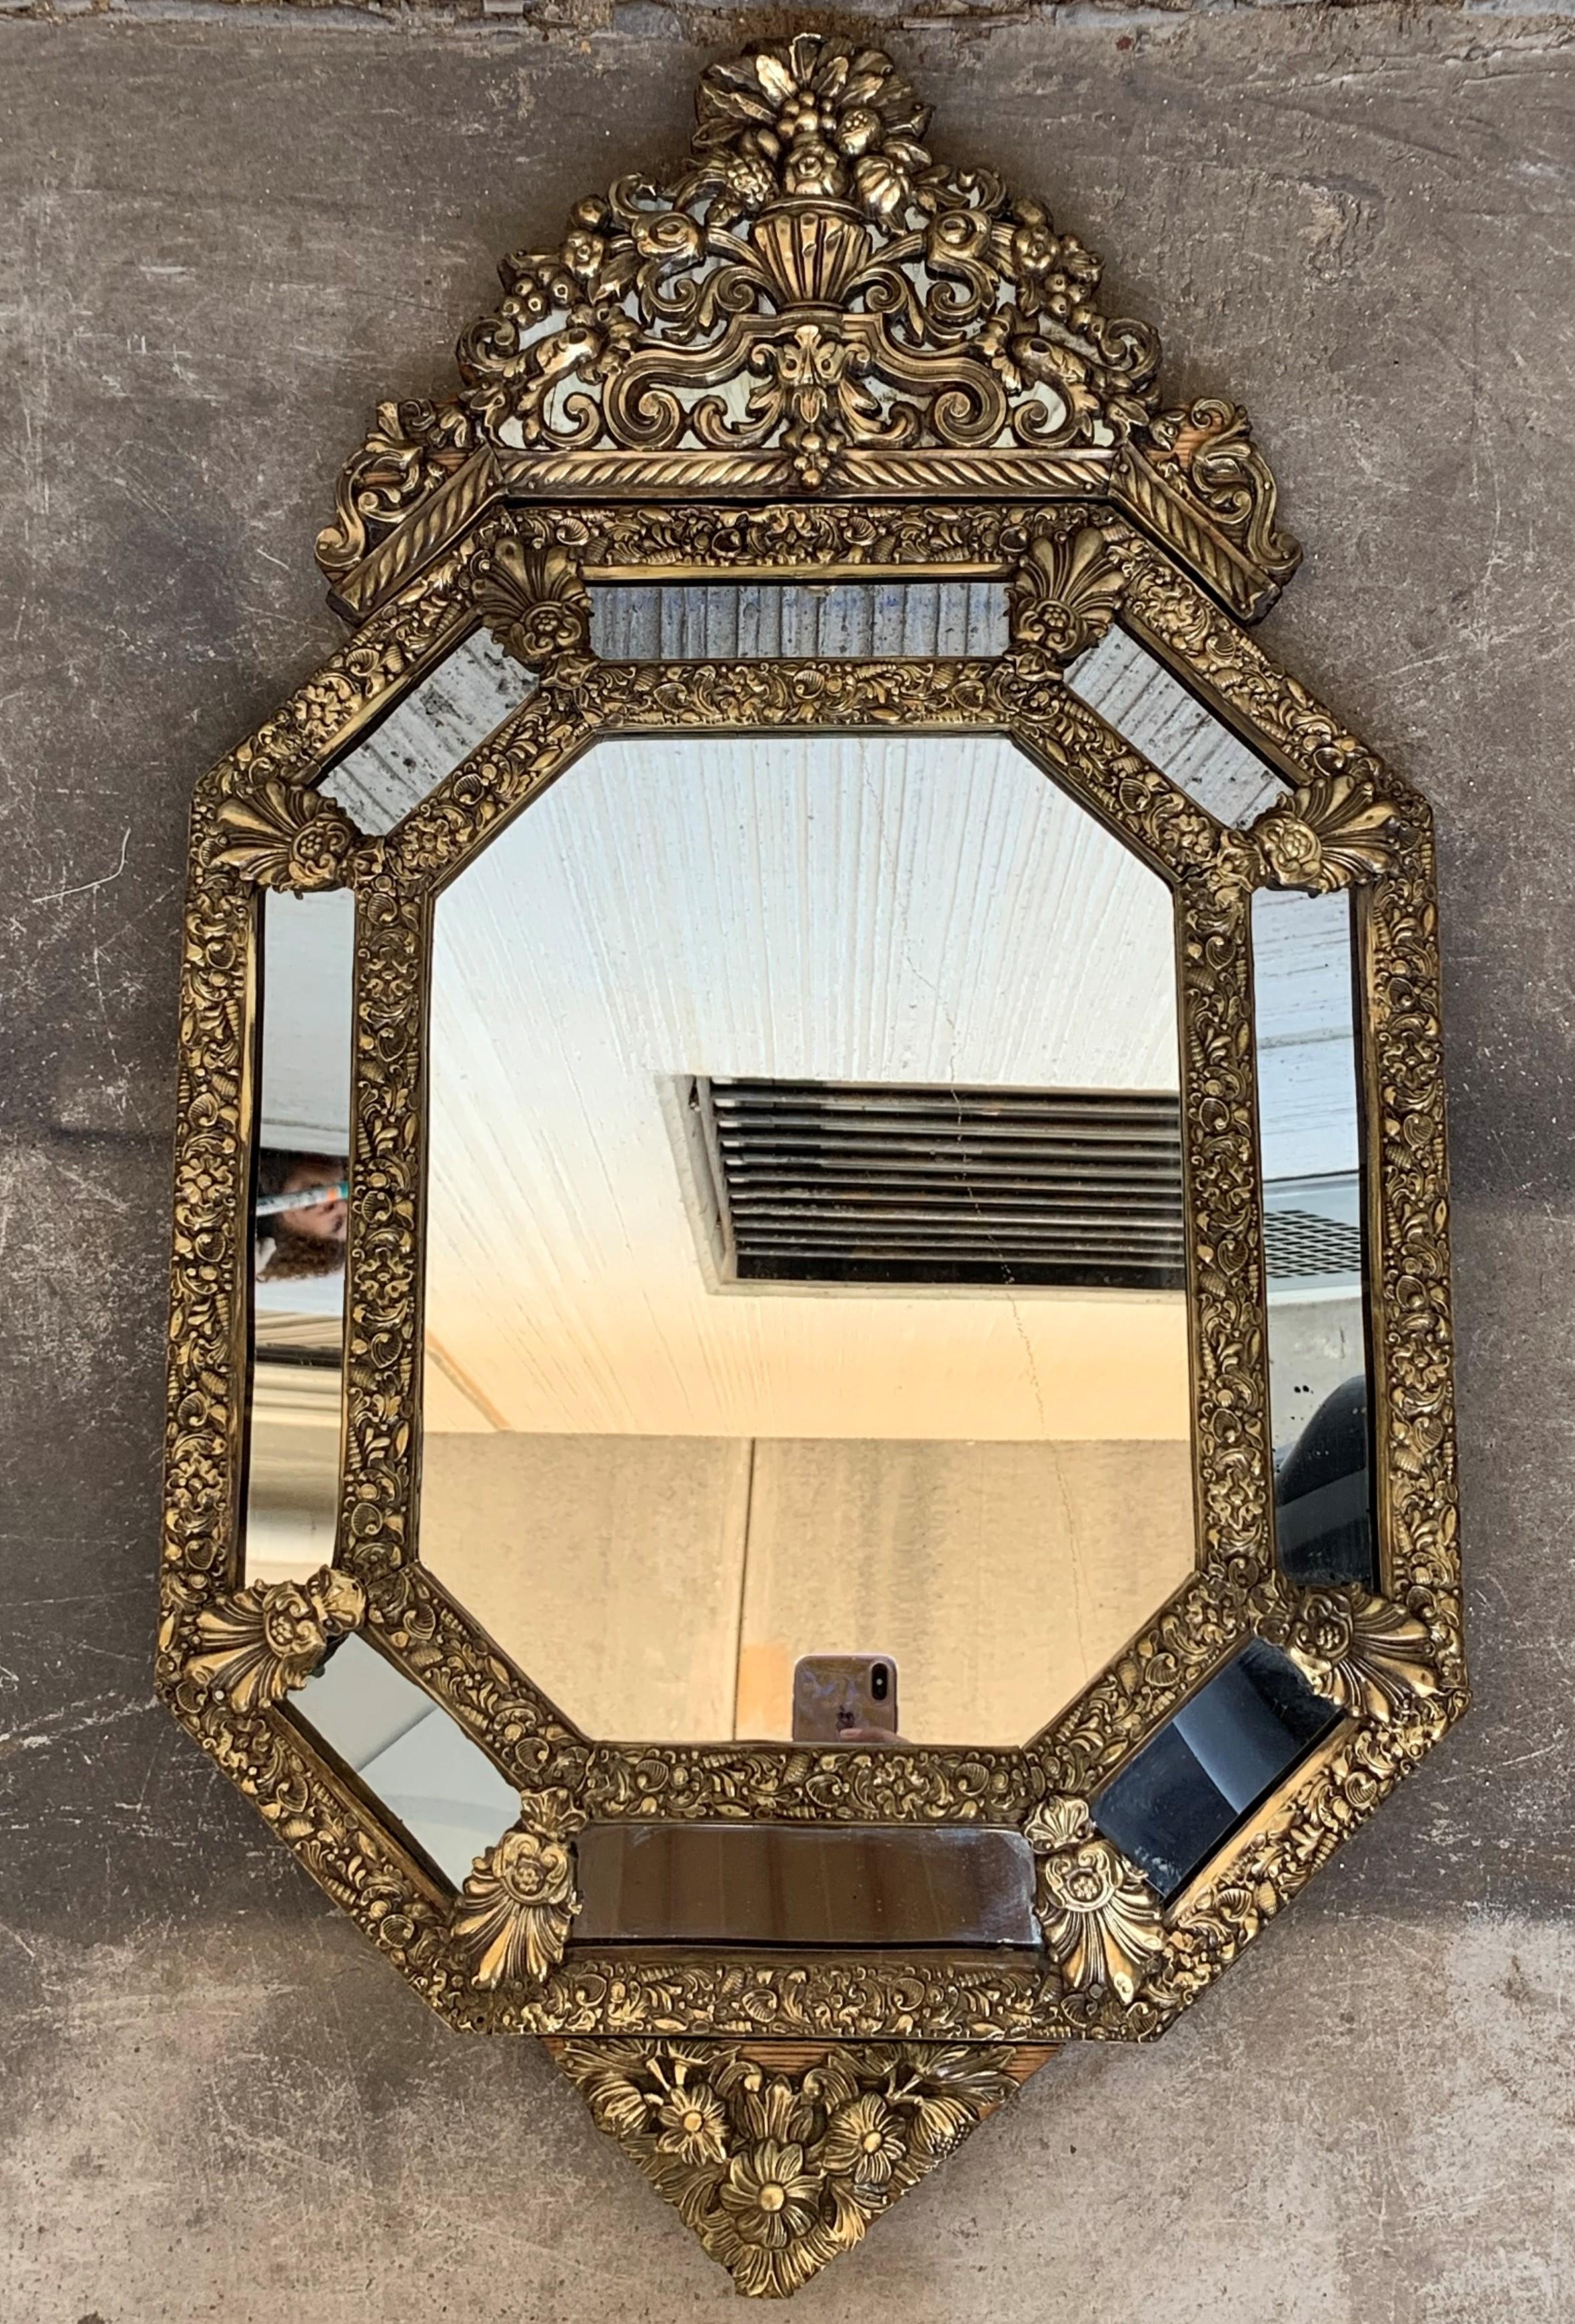 19th century French repousse hexagonal brass relief wall mirror with crest
An elegant Napoleon III period mirror made with central beveled glass and eight rectangular glasses joined between them by decorative brass repousse floral patterns.
This